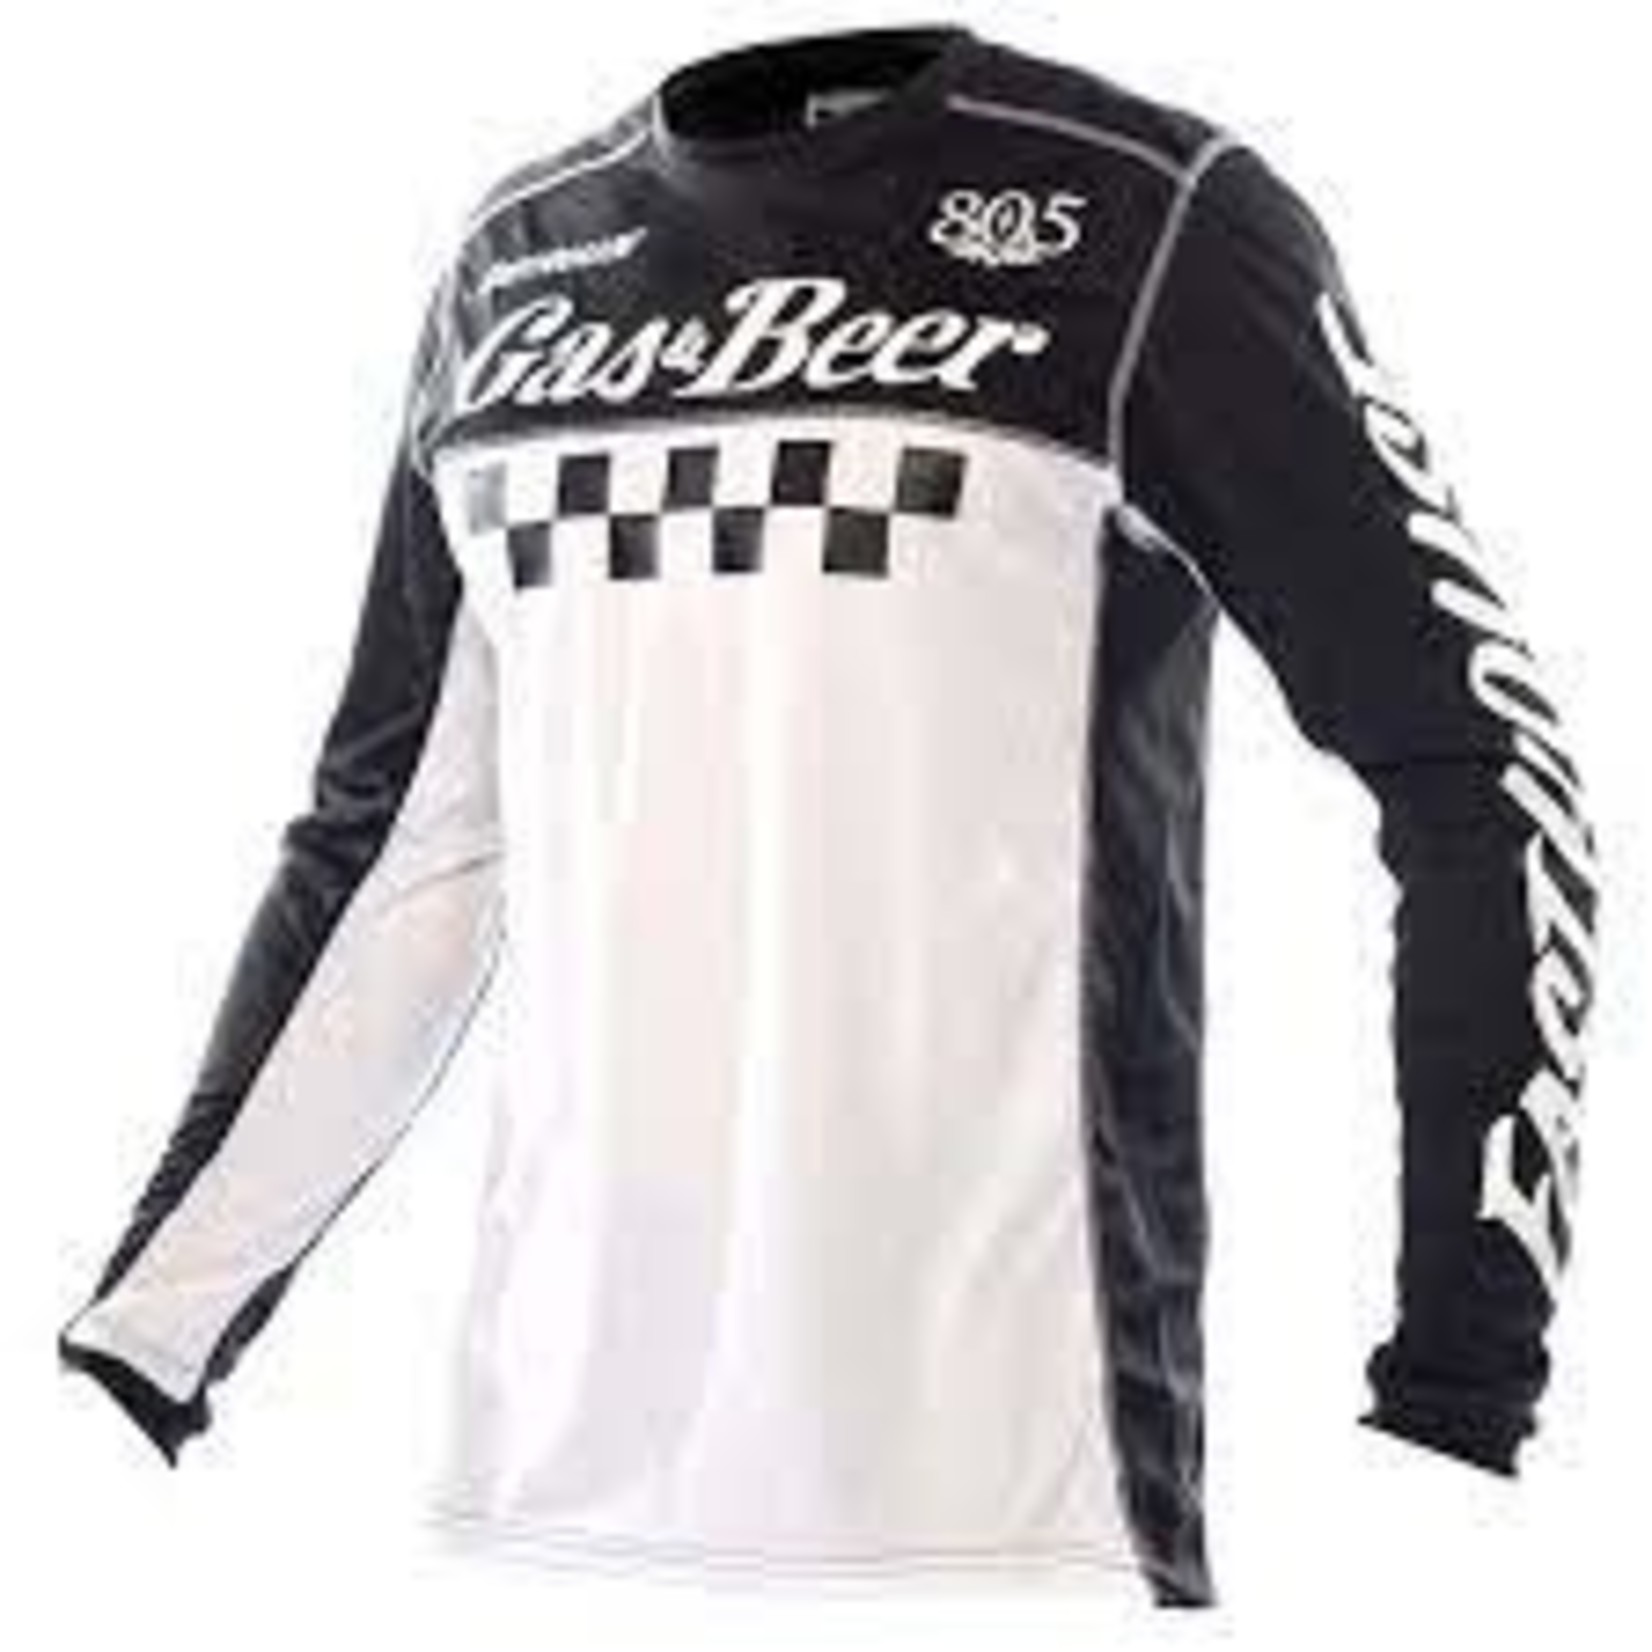 FASTHOUSE 805 Grindhouse Tavern Jersey, Black/White